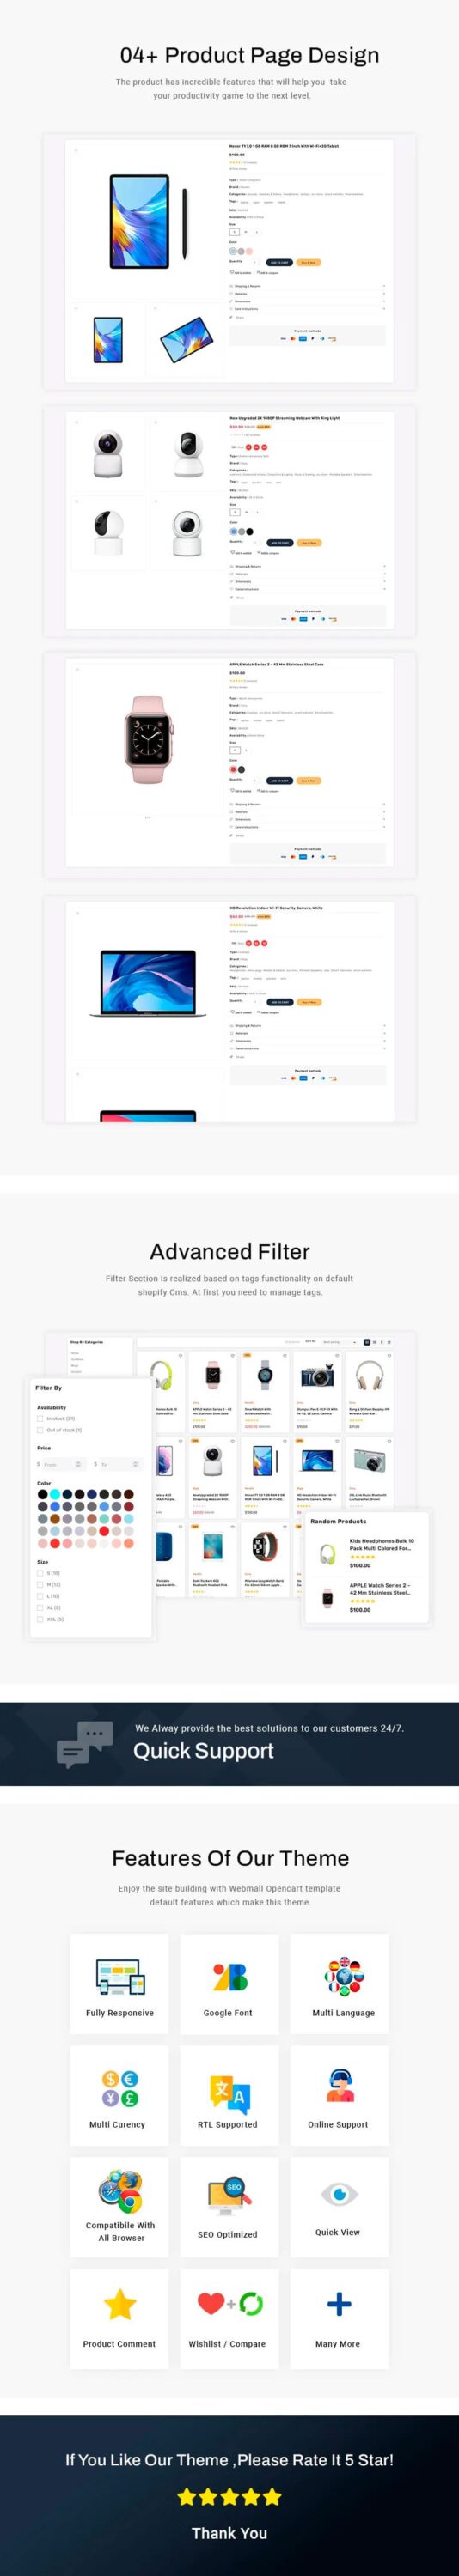 Many screenshot Digitic: 04+ Product Page Design.